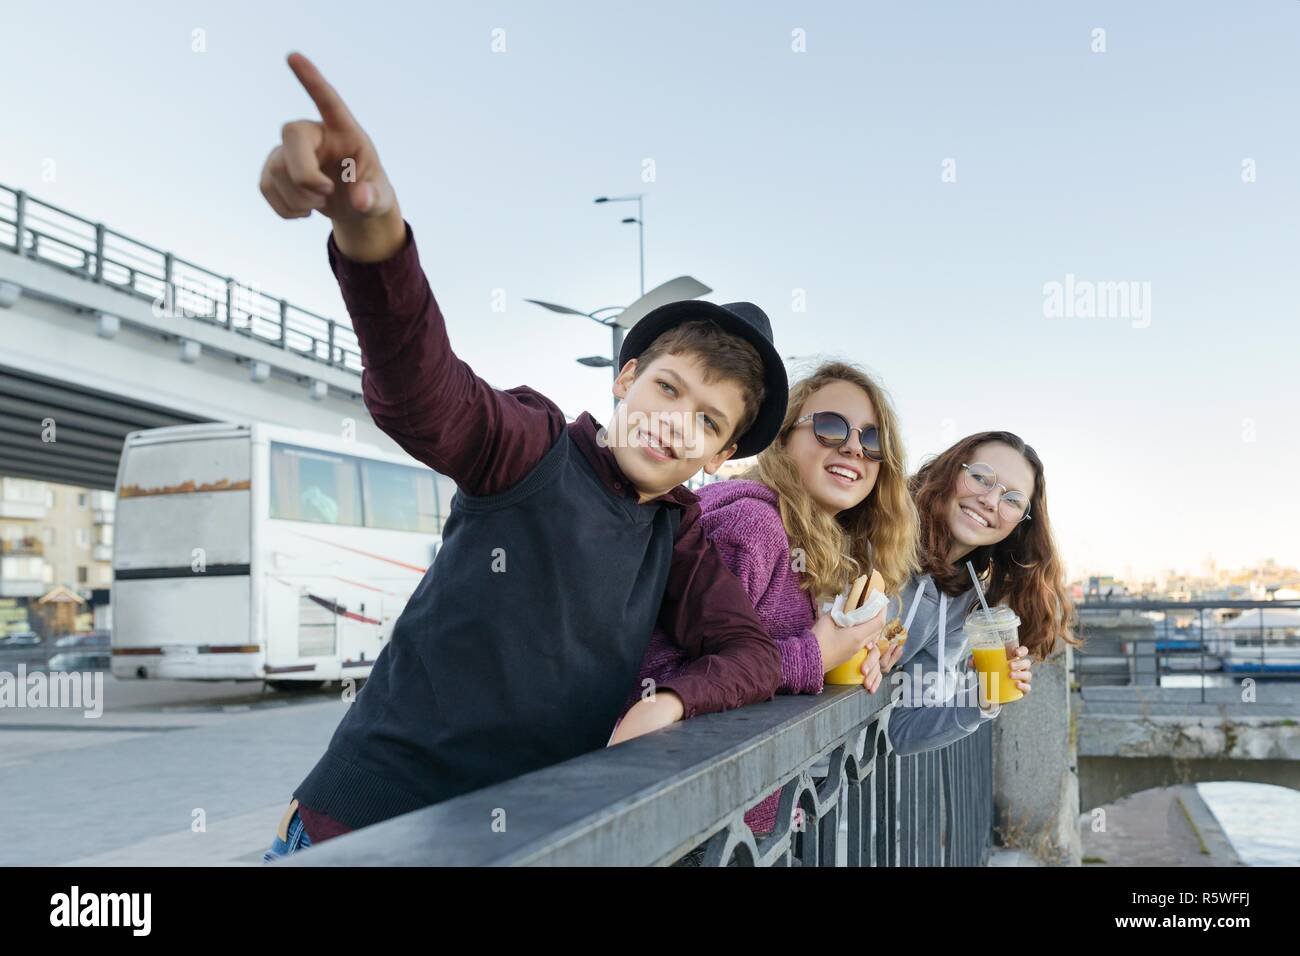 Lifestyle of adolescents, boy and two teen girls are walking in the city. Laughing, talking children eating street food, having fun. Background of the Stock Photo